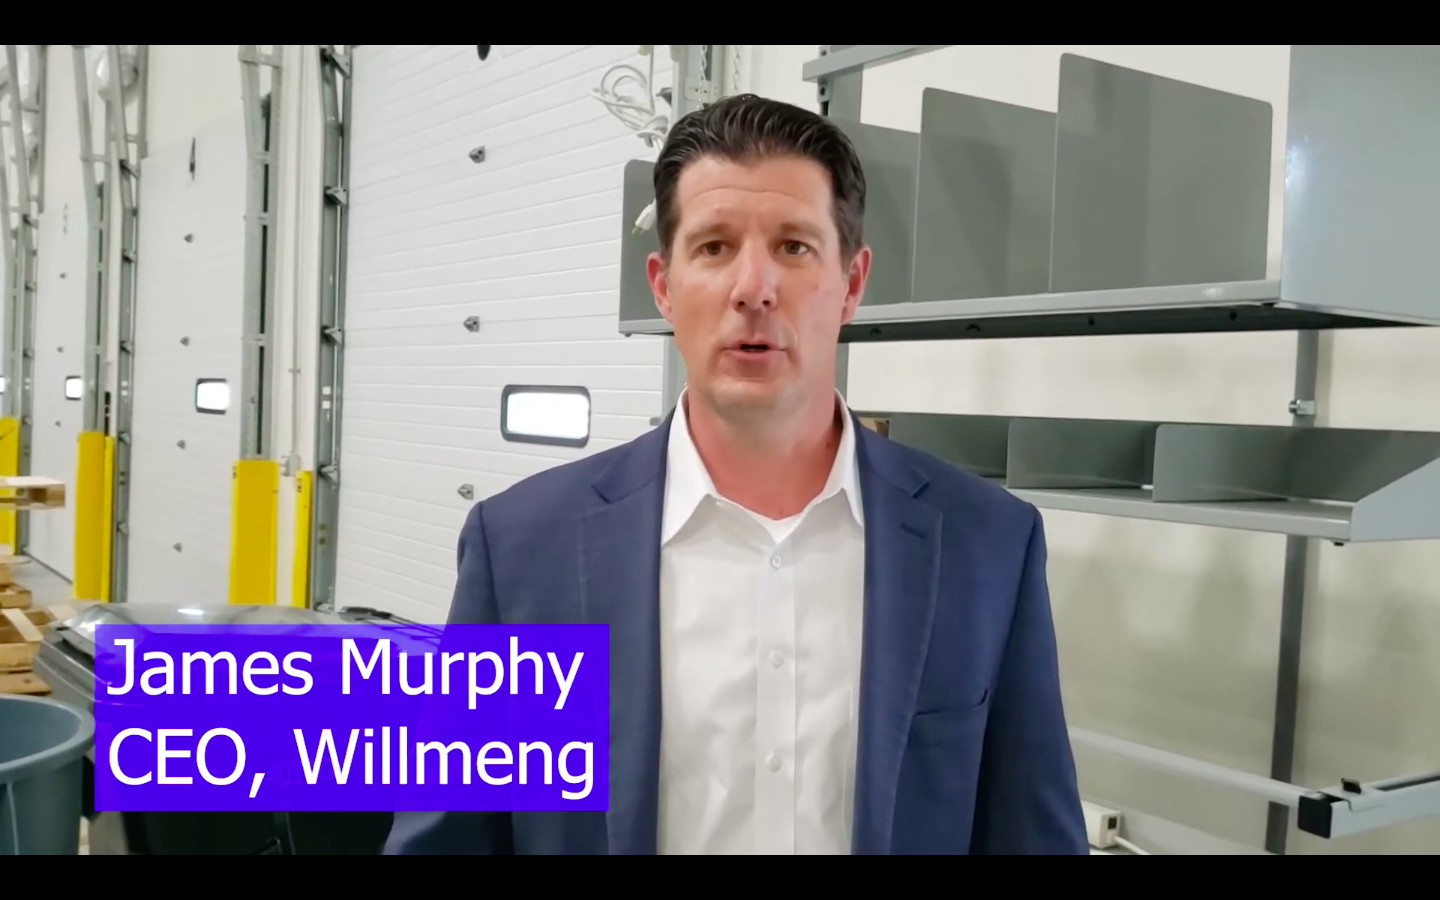 James Murphy, CEO of Willmeng, delivers a mask manufacturing facility in Wilmington.